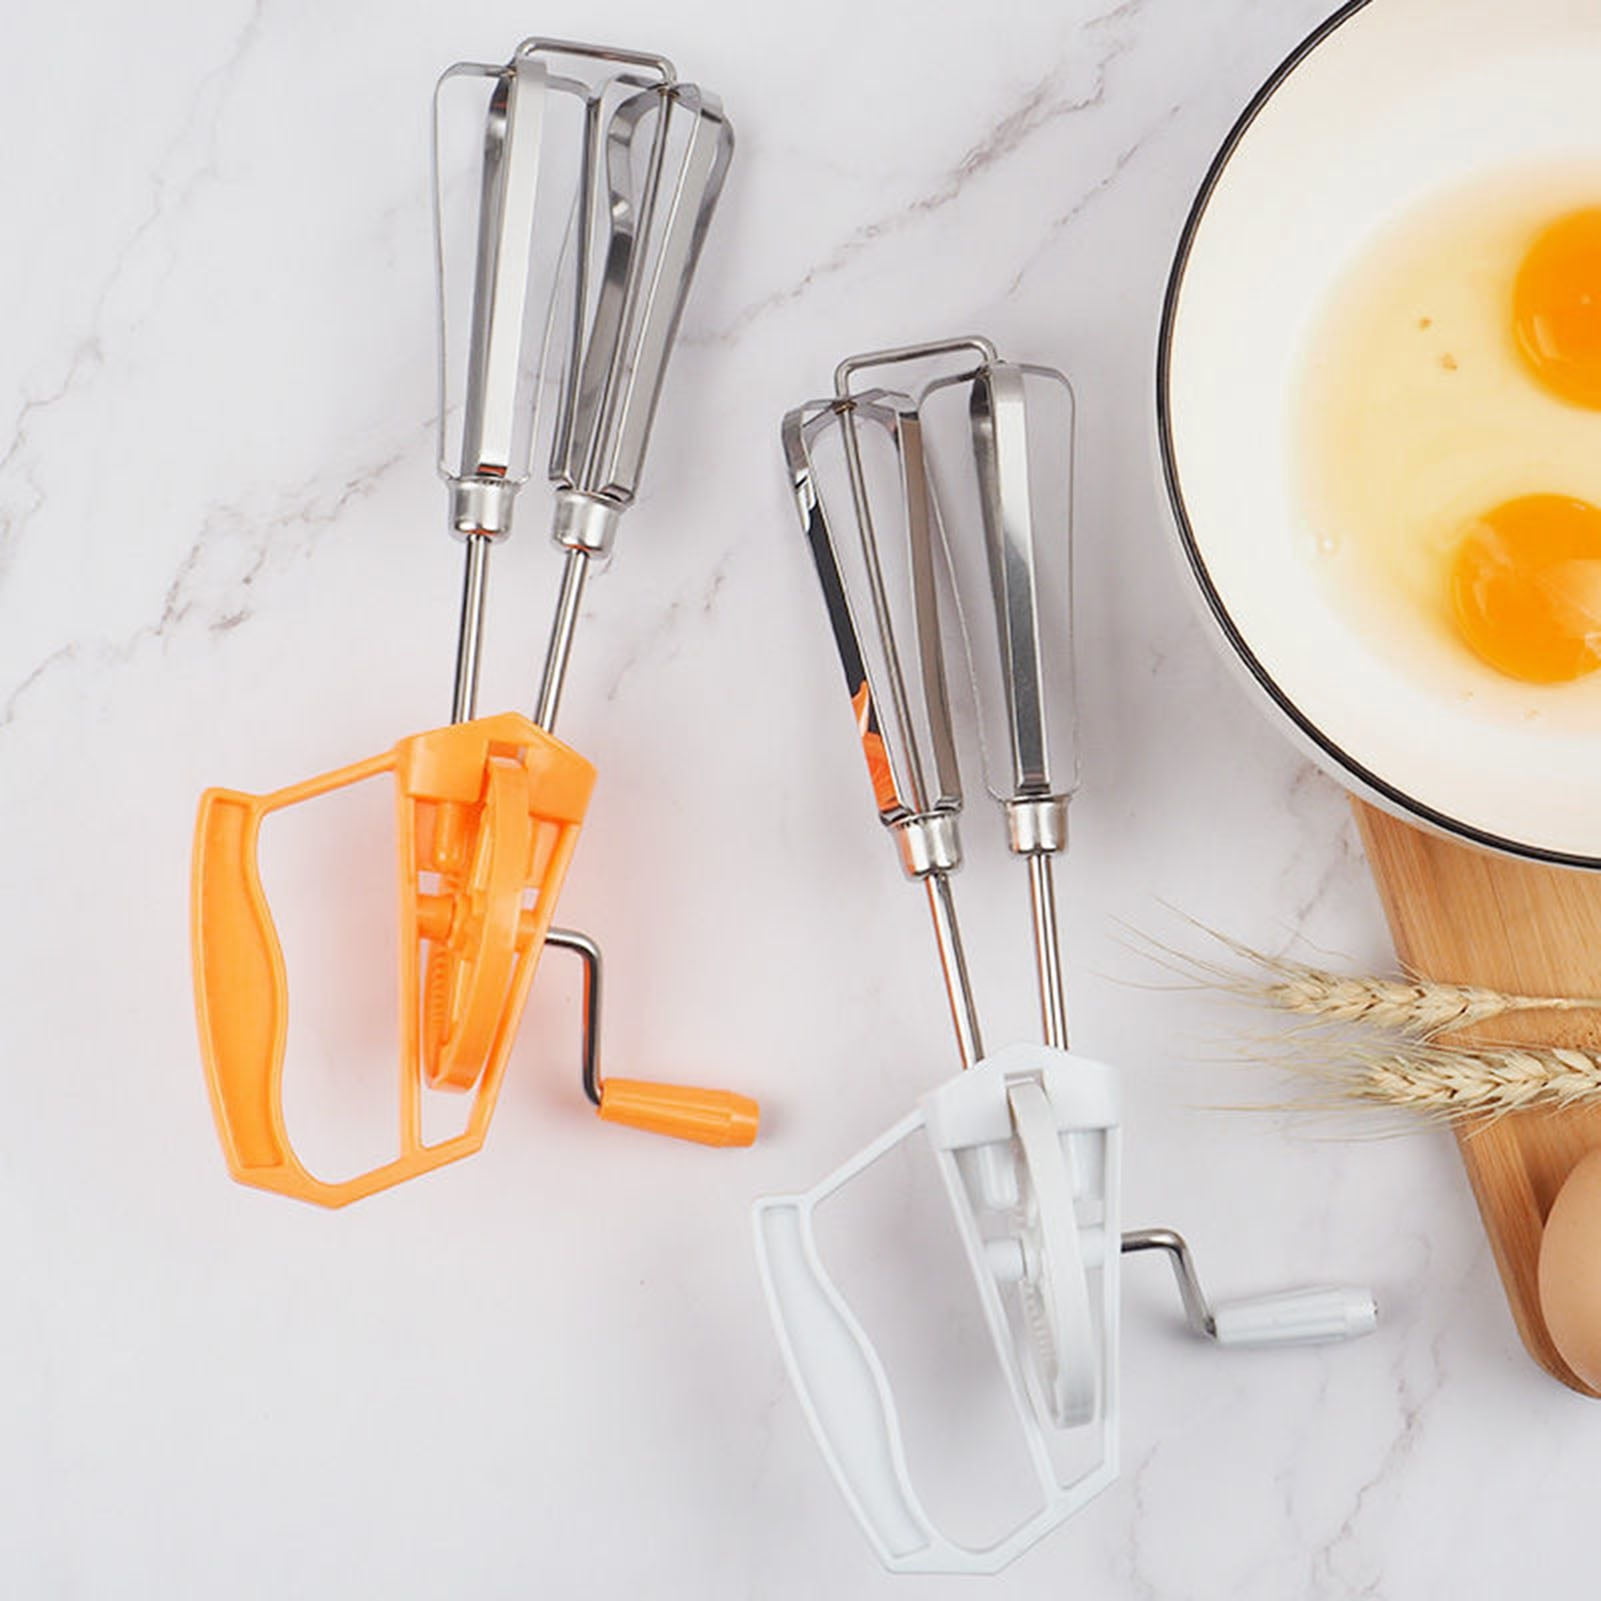 Manual Hand Egg Beater Mixer Isolated On White Background Stock Photo,  Picture and Royalty Free Image. Image 36038463.